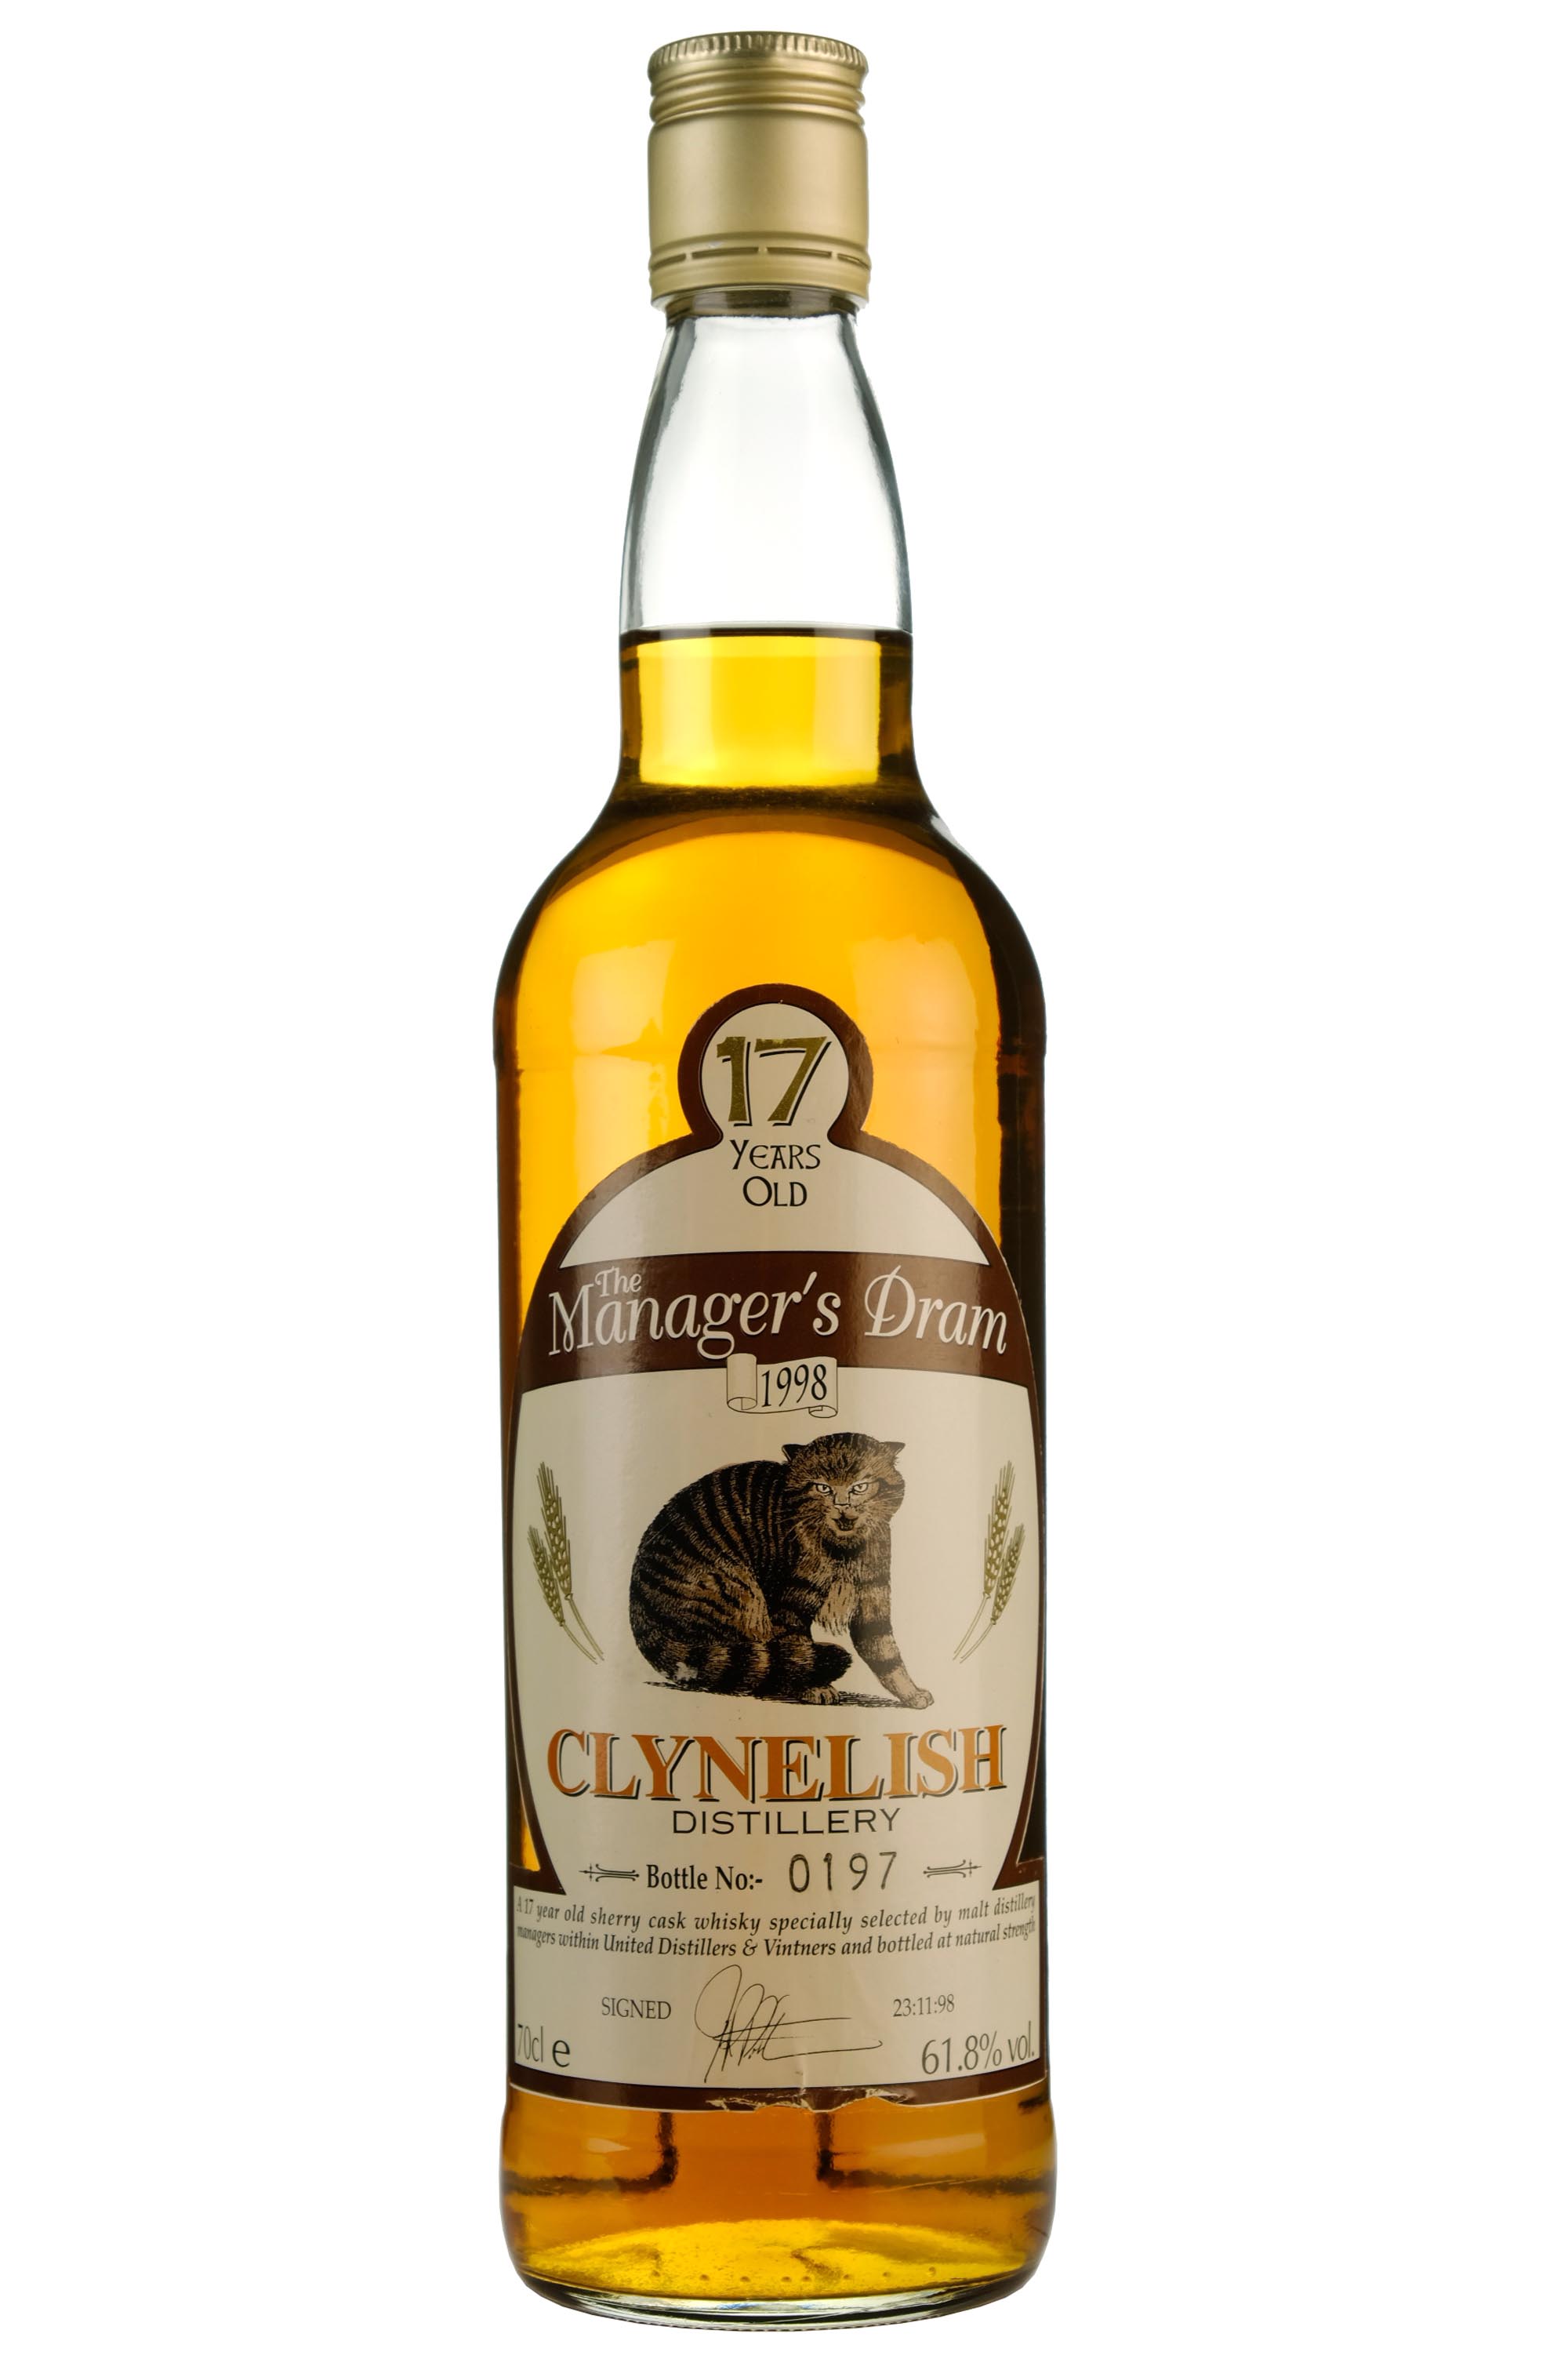 Clynelish 17 Year Old The Manager's Dram 1998 Release